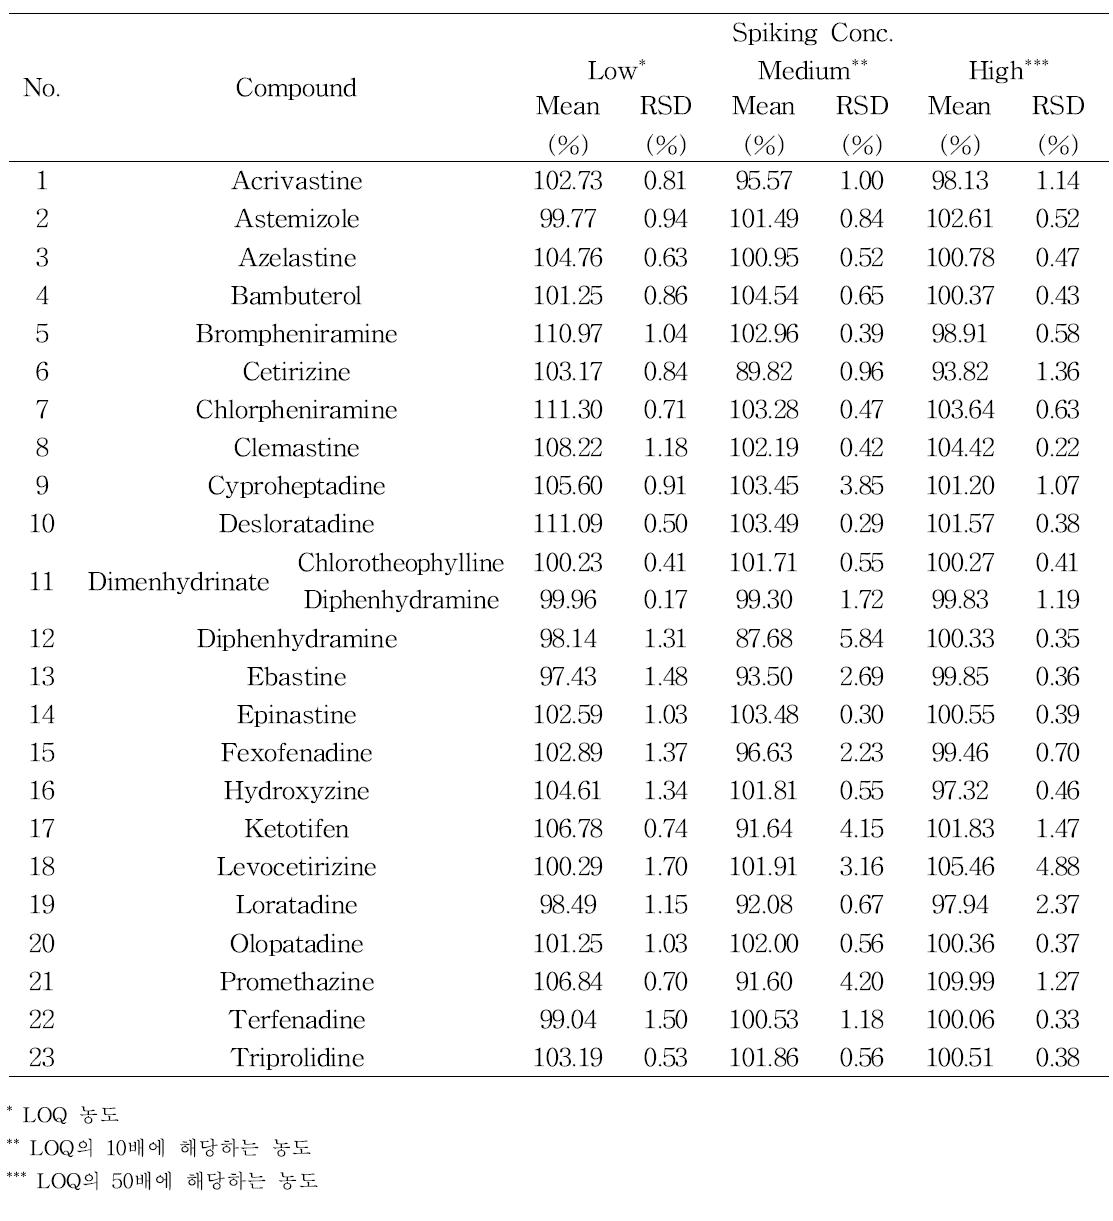 The recovery of 23 antihistamines in soft capsule sample for different concentrations